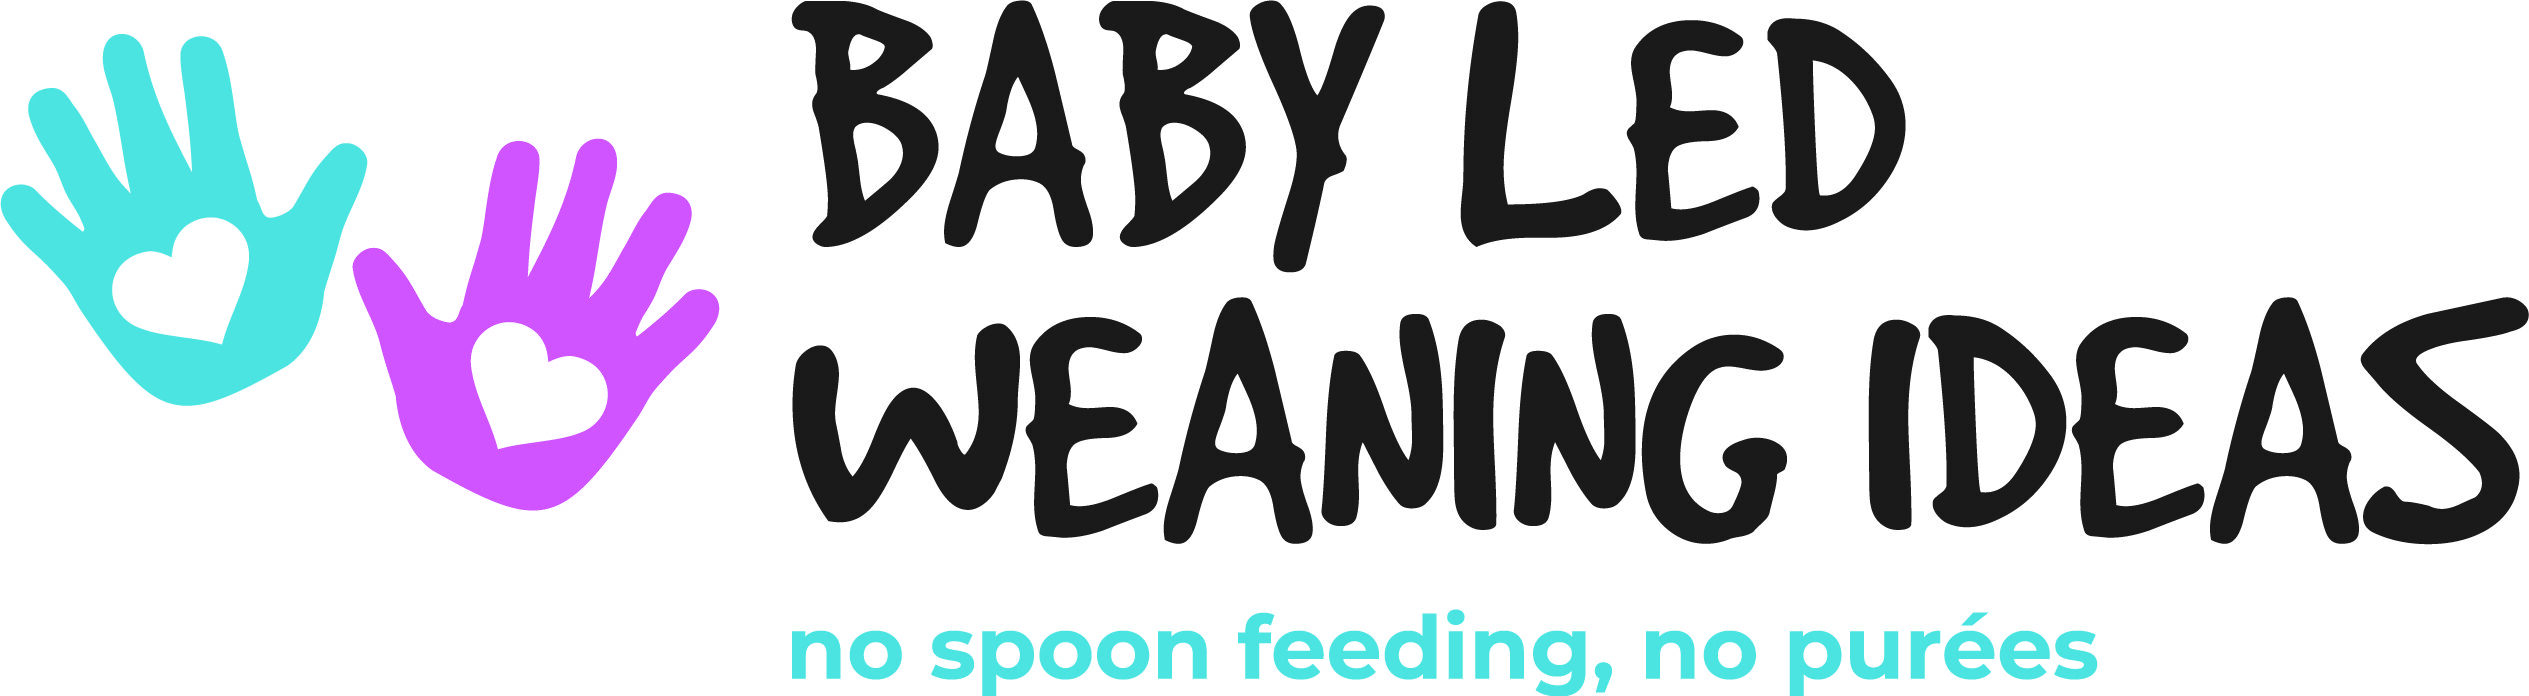 Fahrenheit lade Eventyrer Our BLW Journey - Baby Led Weaning Ideas